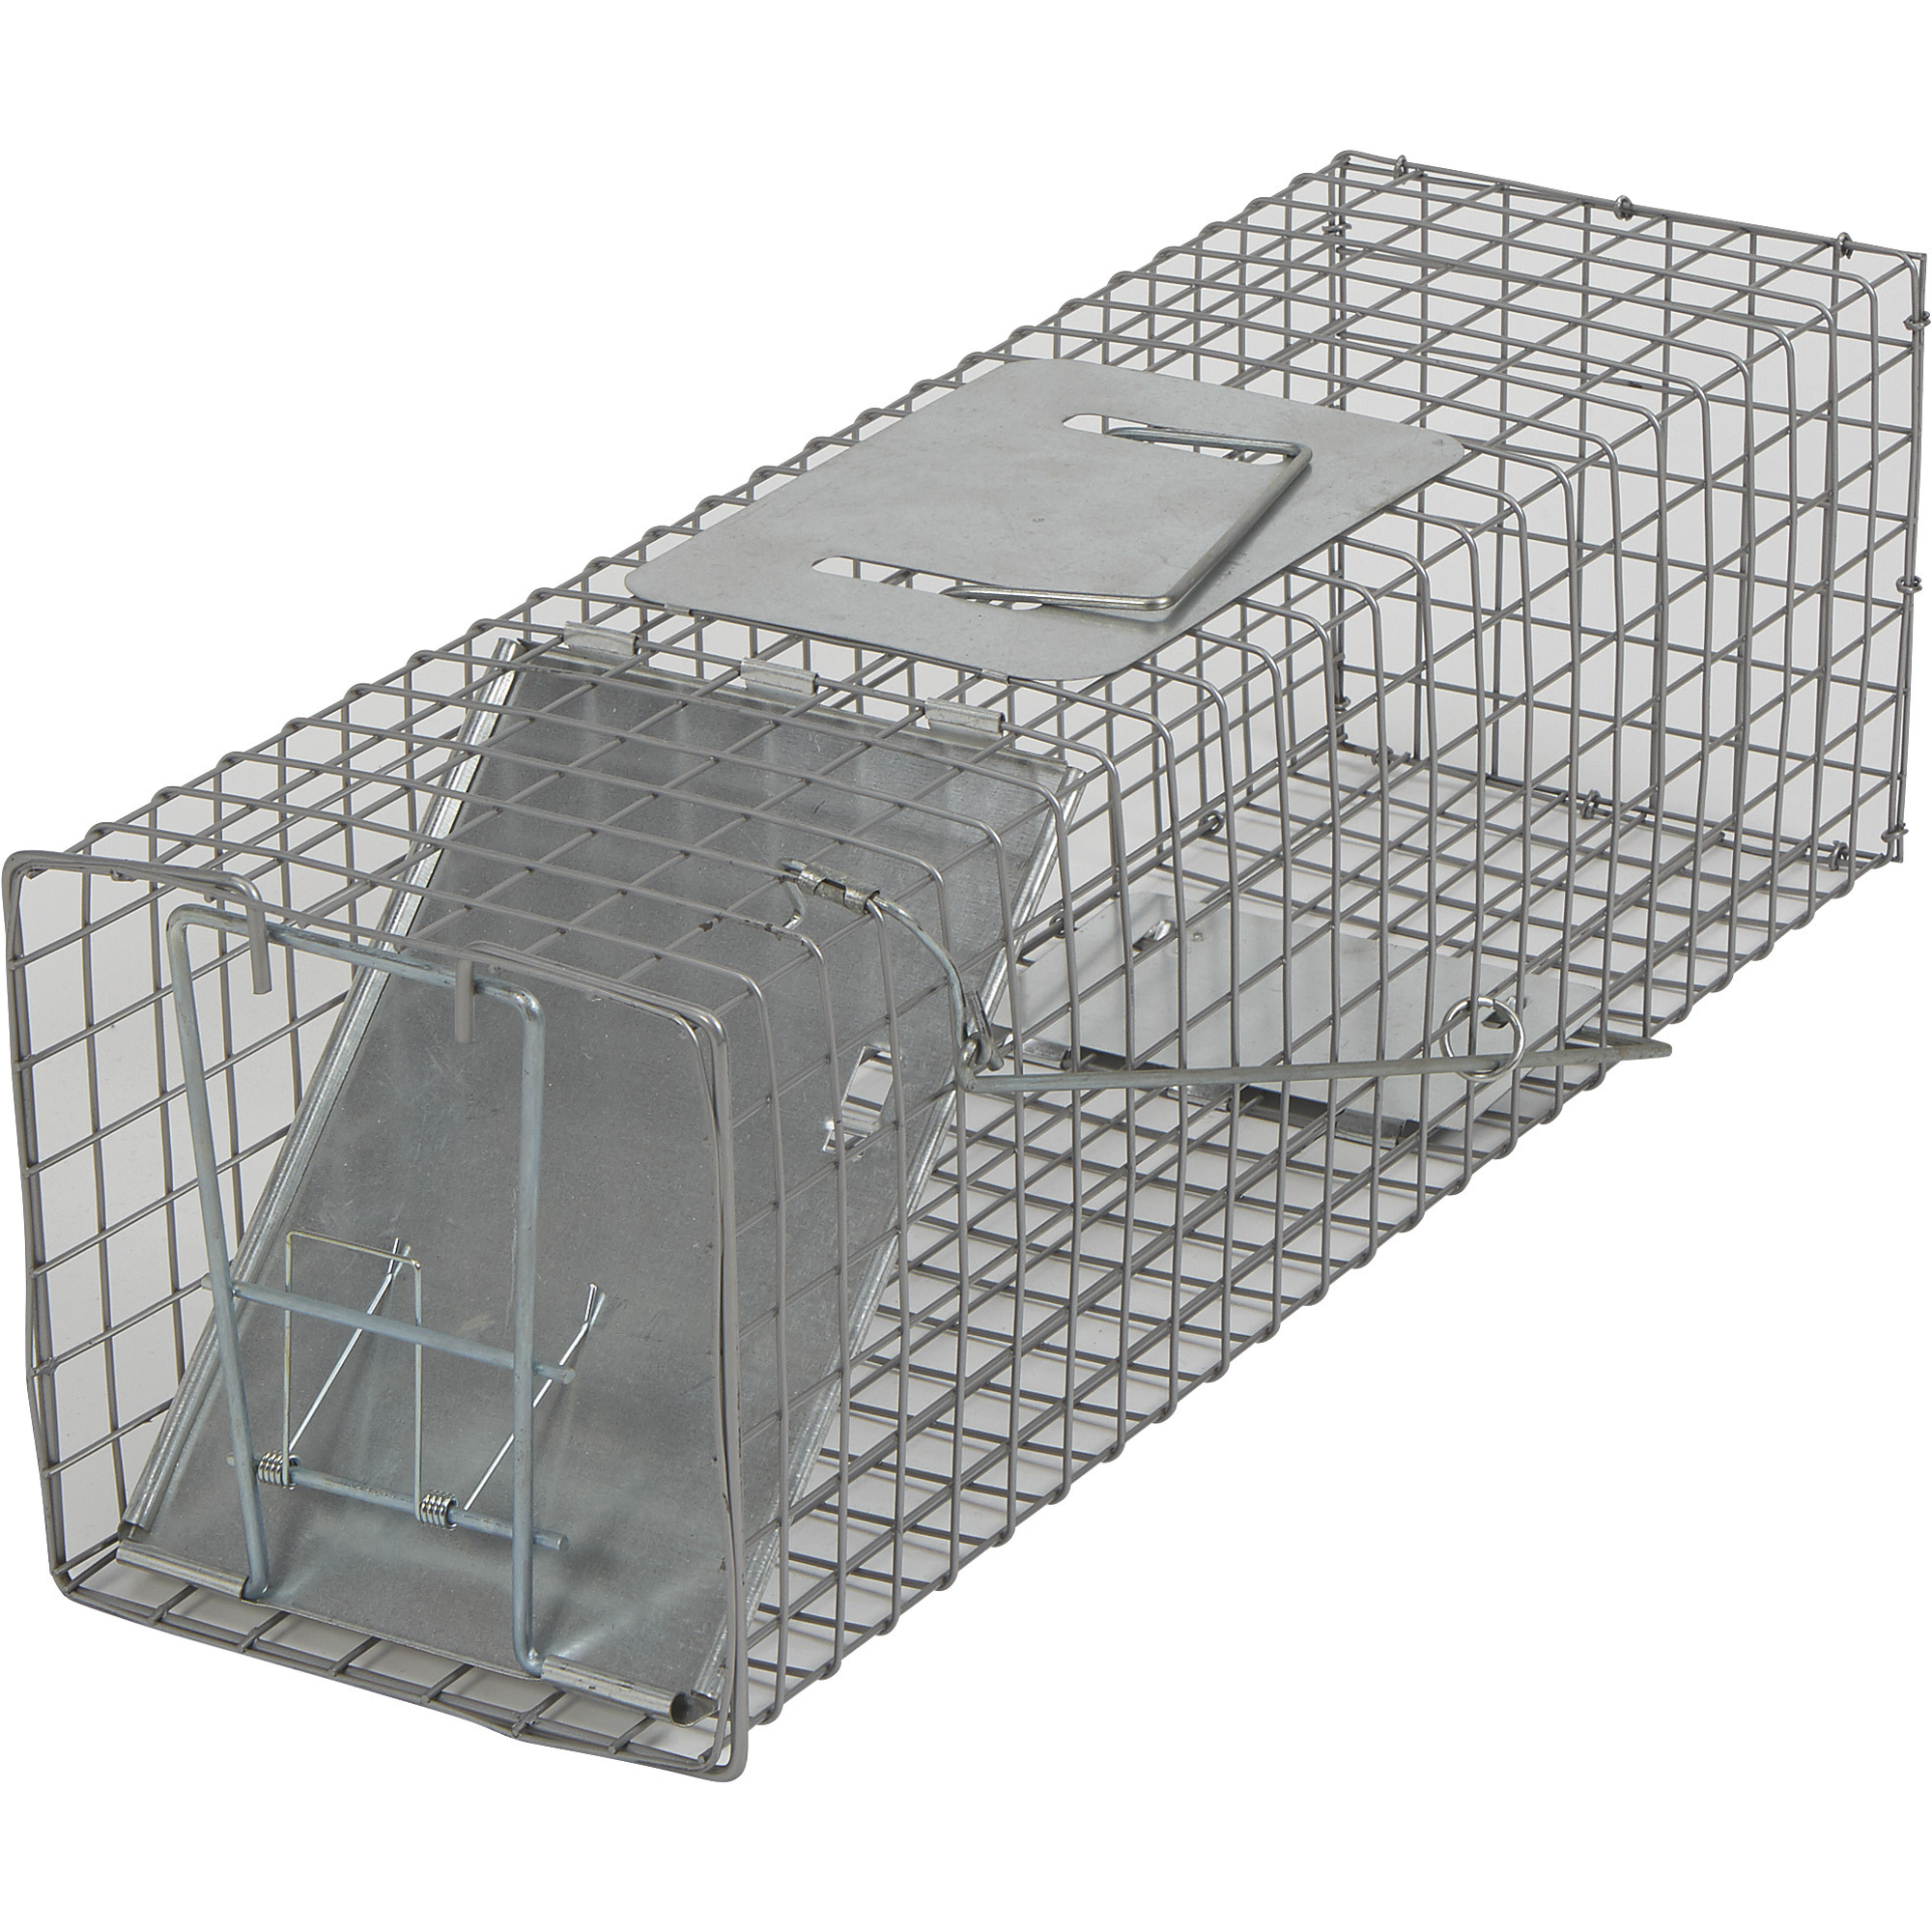 Neocraft Rapid-Set 2 pack Catch and Release Live Animal Trap 40050